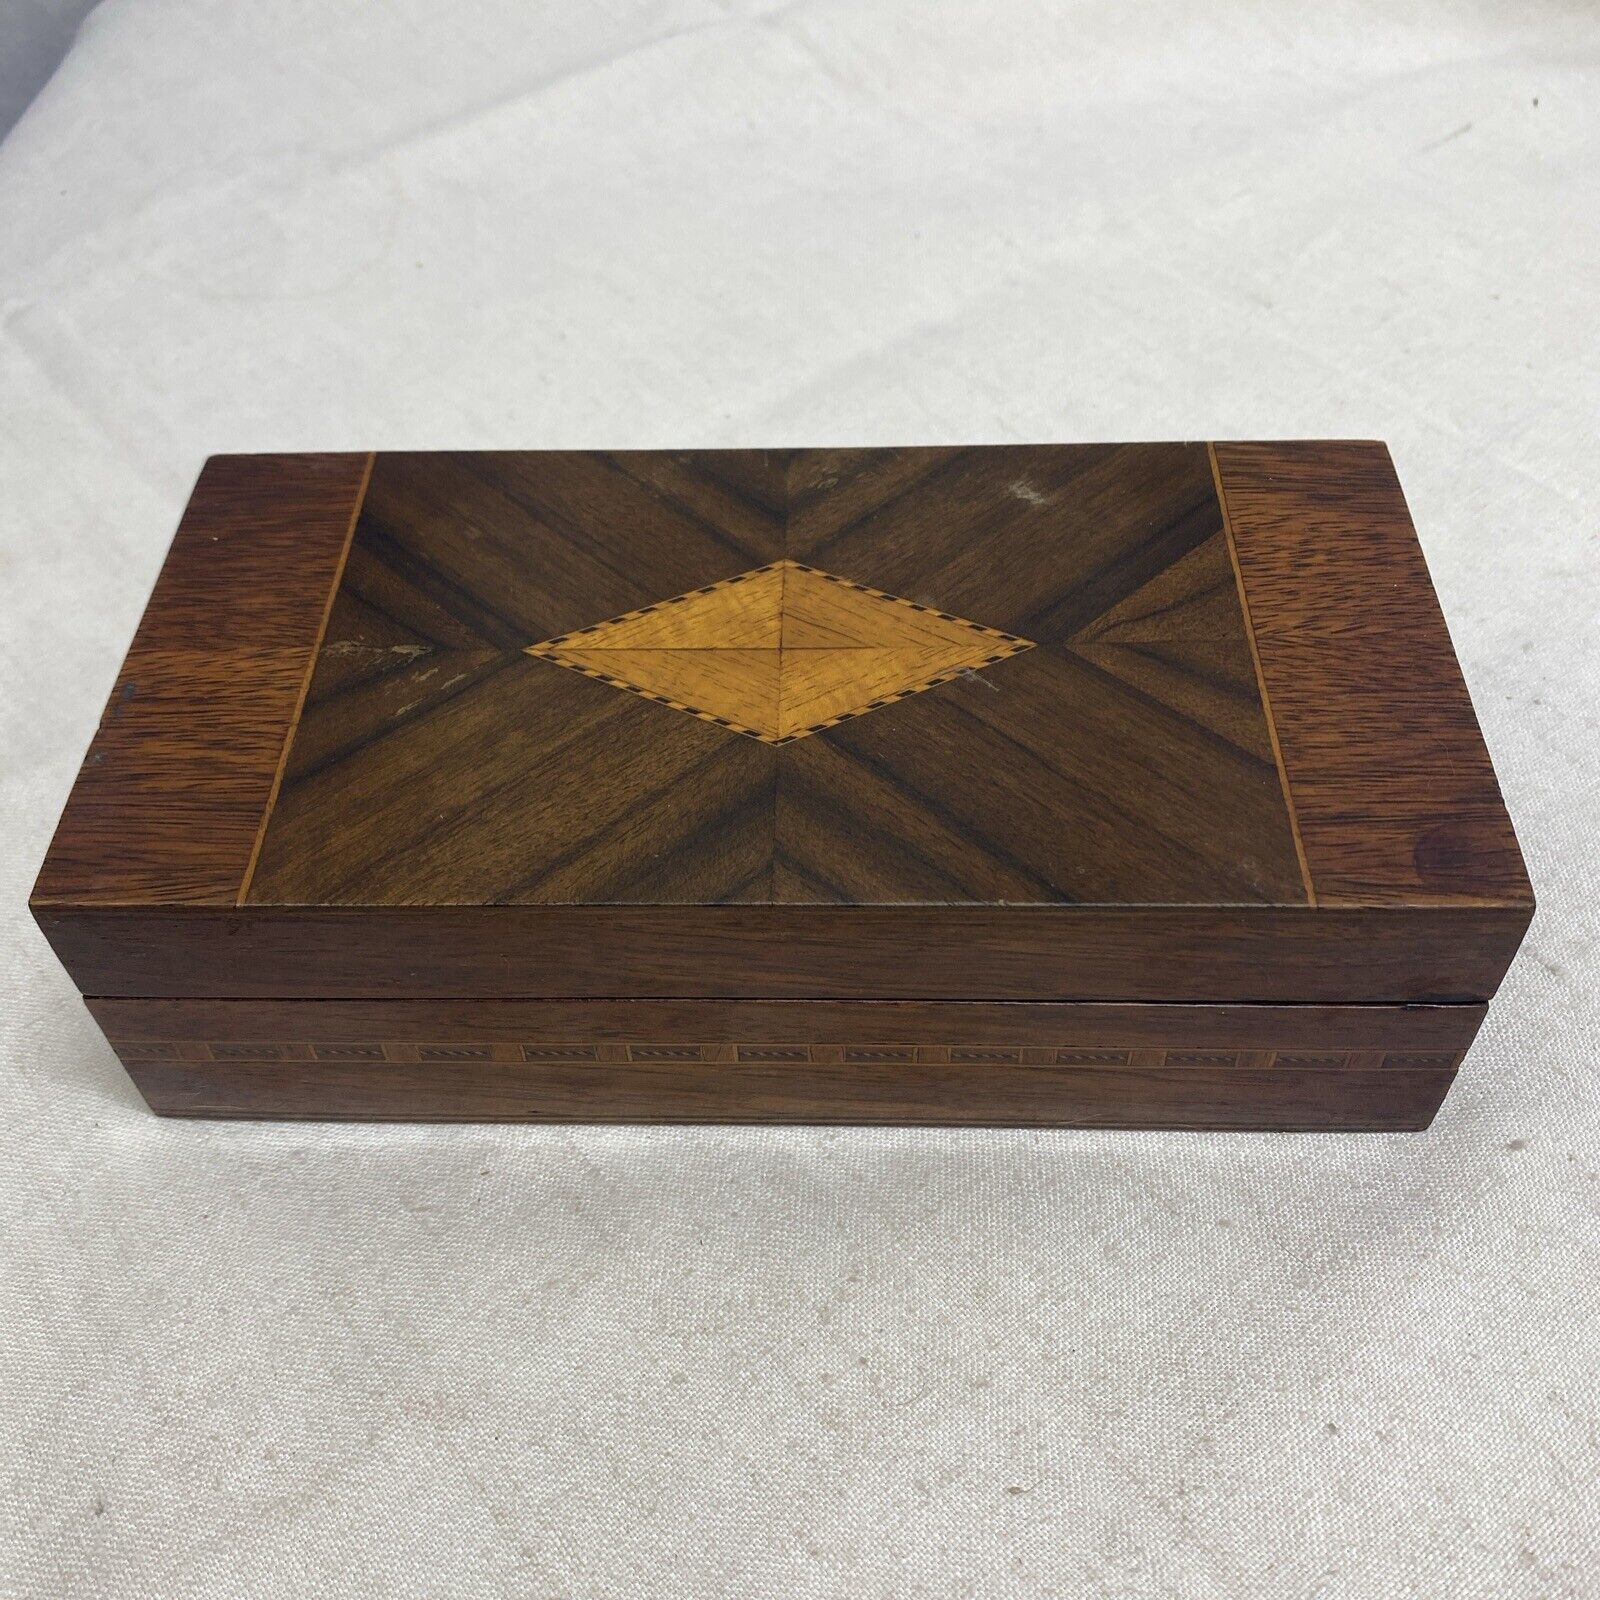 RARE VTG ANTIQUE CHICKASAW MFG CO INLAYED WOOD MARQUETRY VANITY JEWELRY BOX USA